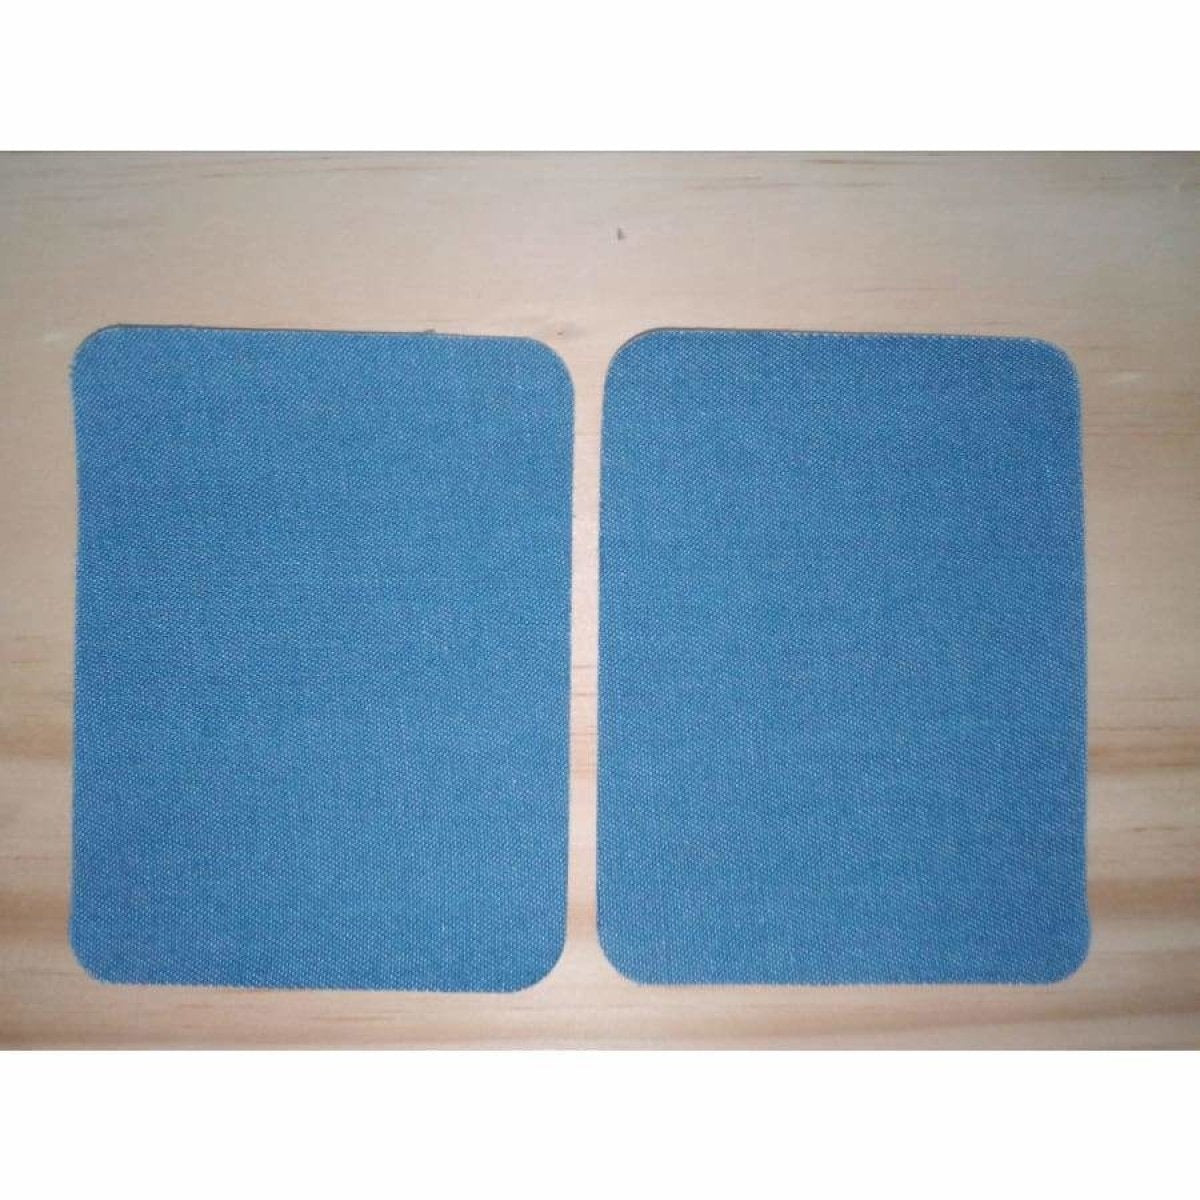 2pcs Iron-on Fabric Blue Black Denim Jeans Clothing Jacket Patch Patches Repair Sewing Shapes - 12.5x9.5cm Blue A - - Asia Sell